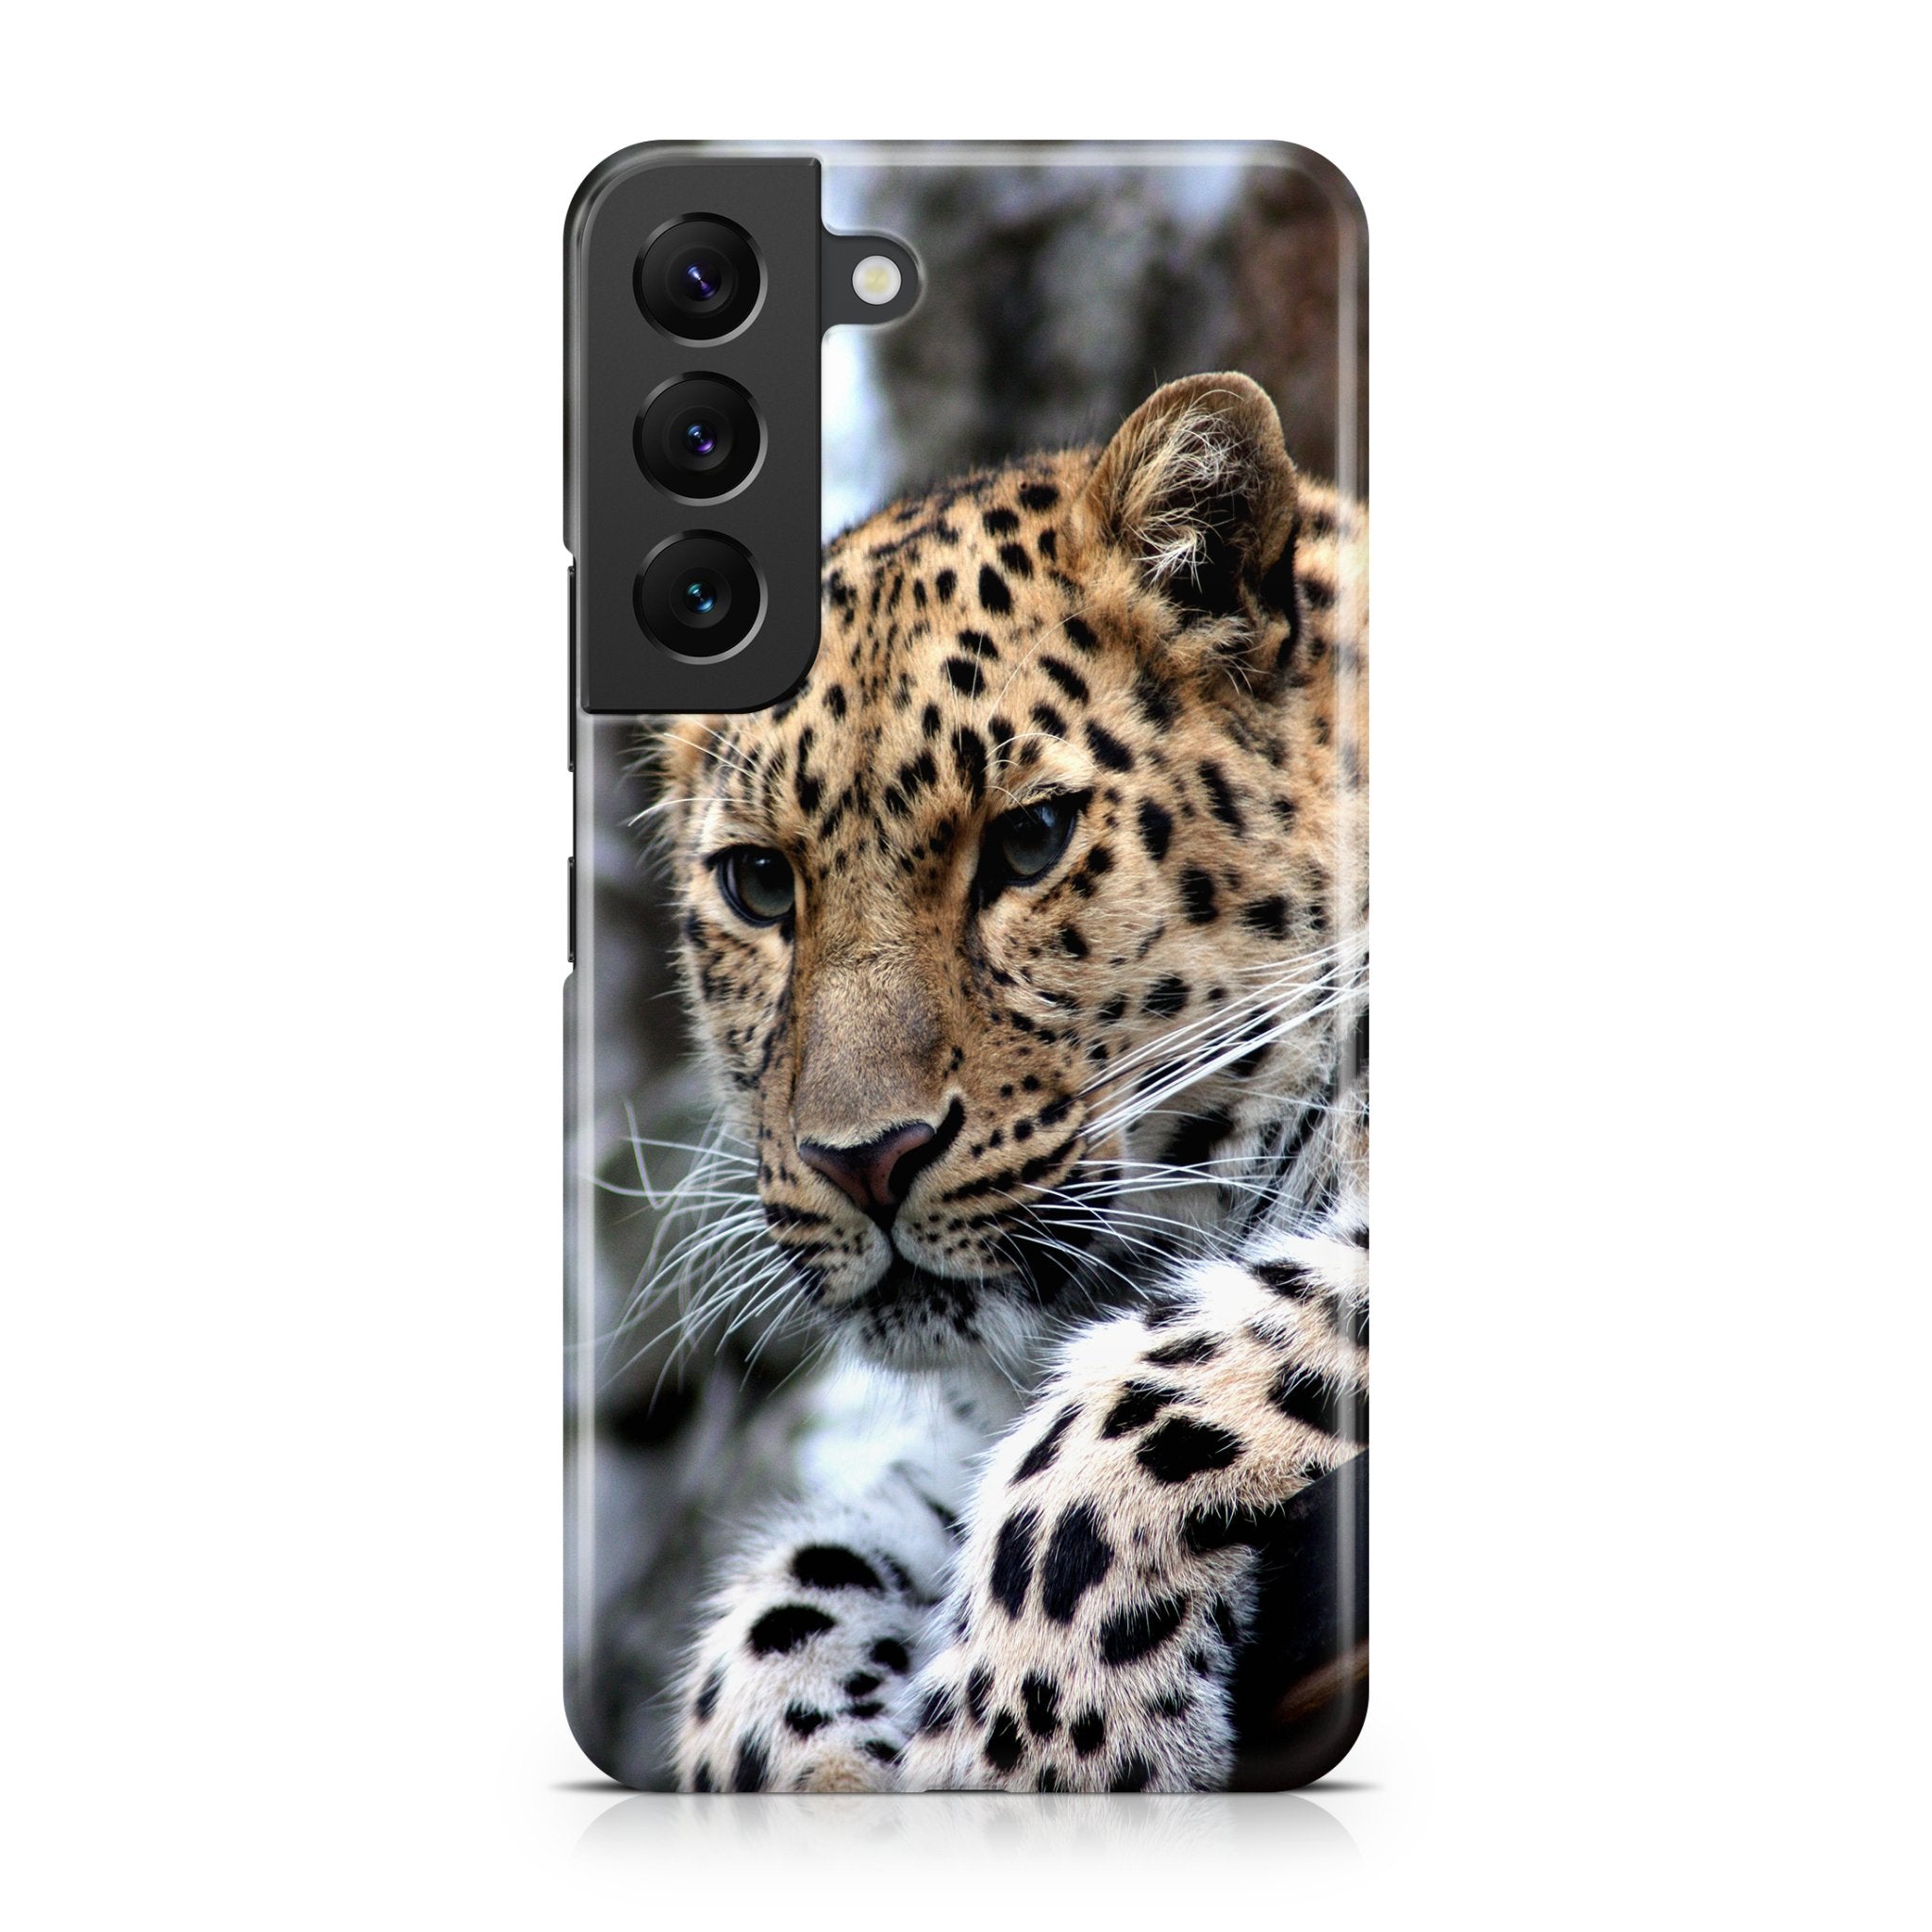 Leopard I - Samsung phone case designs by CaseSwagger